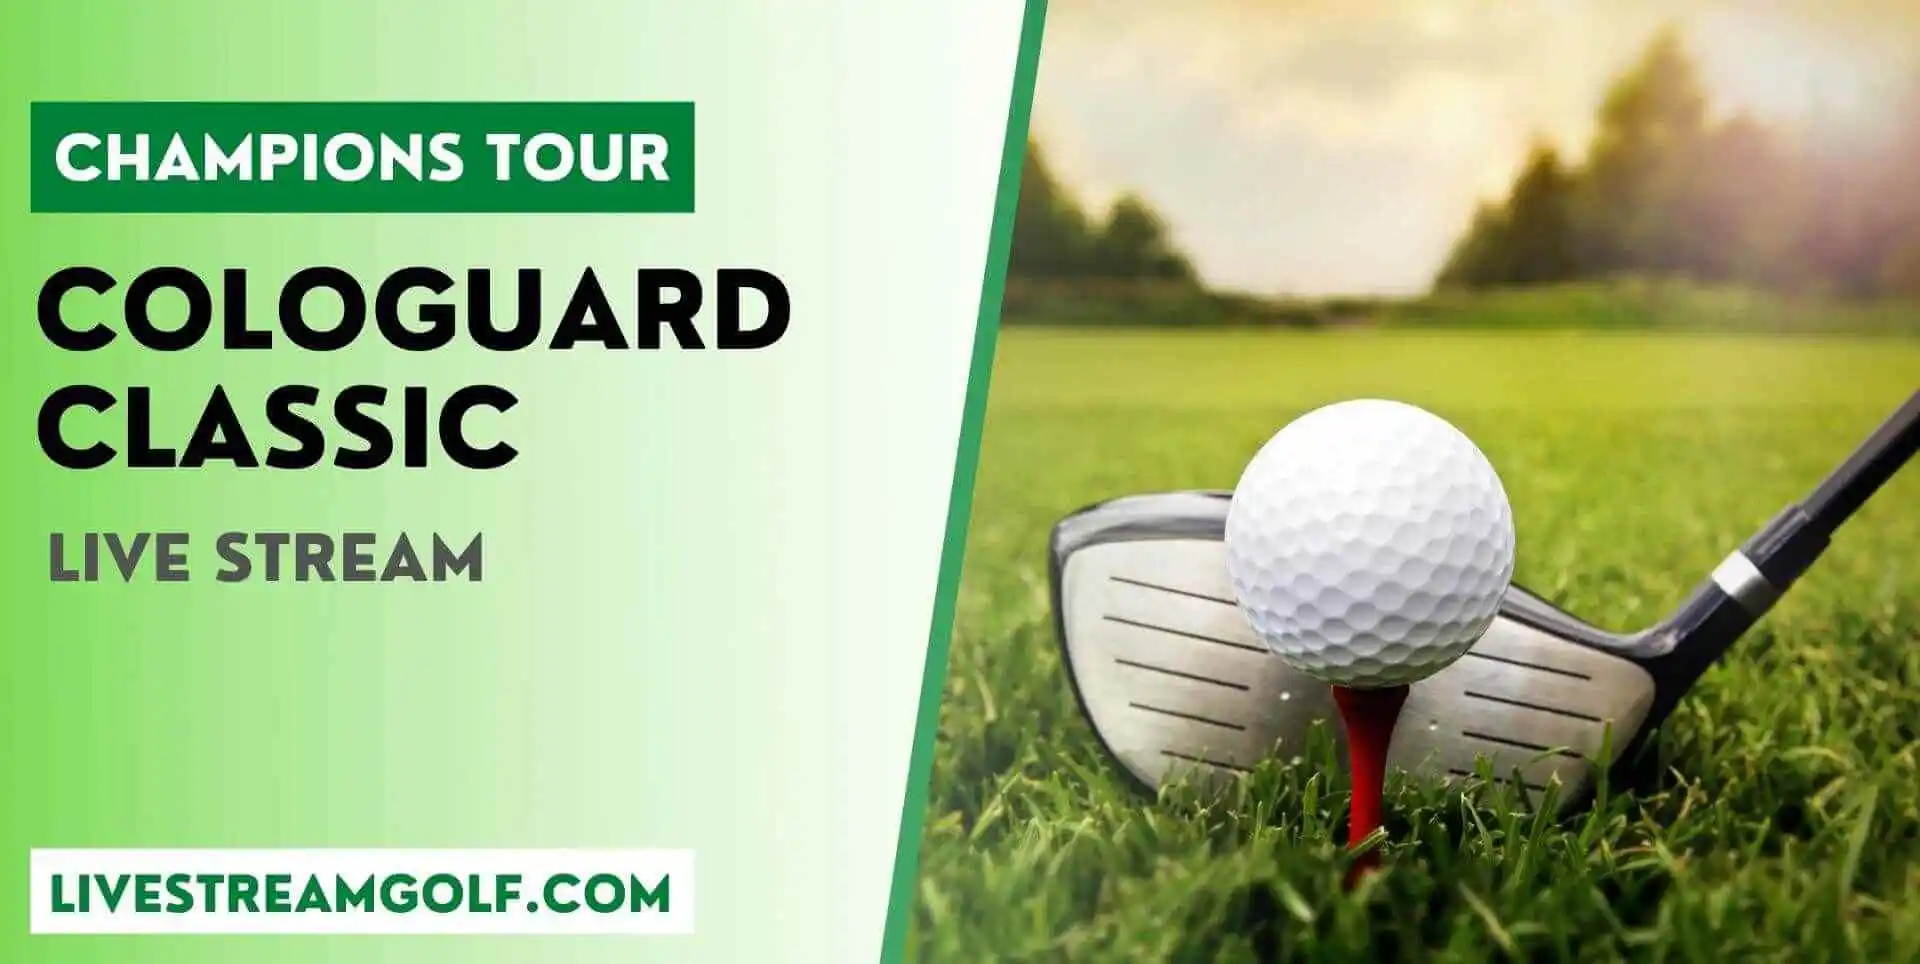 Cologuard Classic Live Streaming Golf Champions Tour